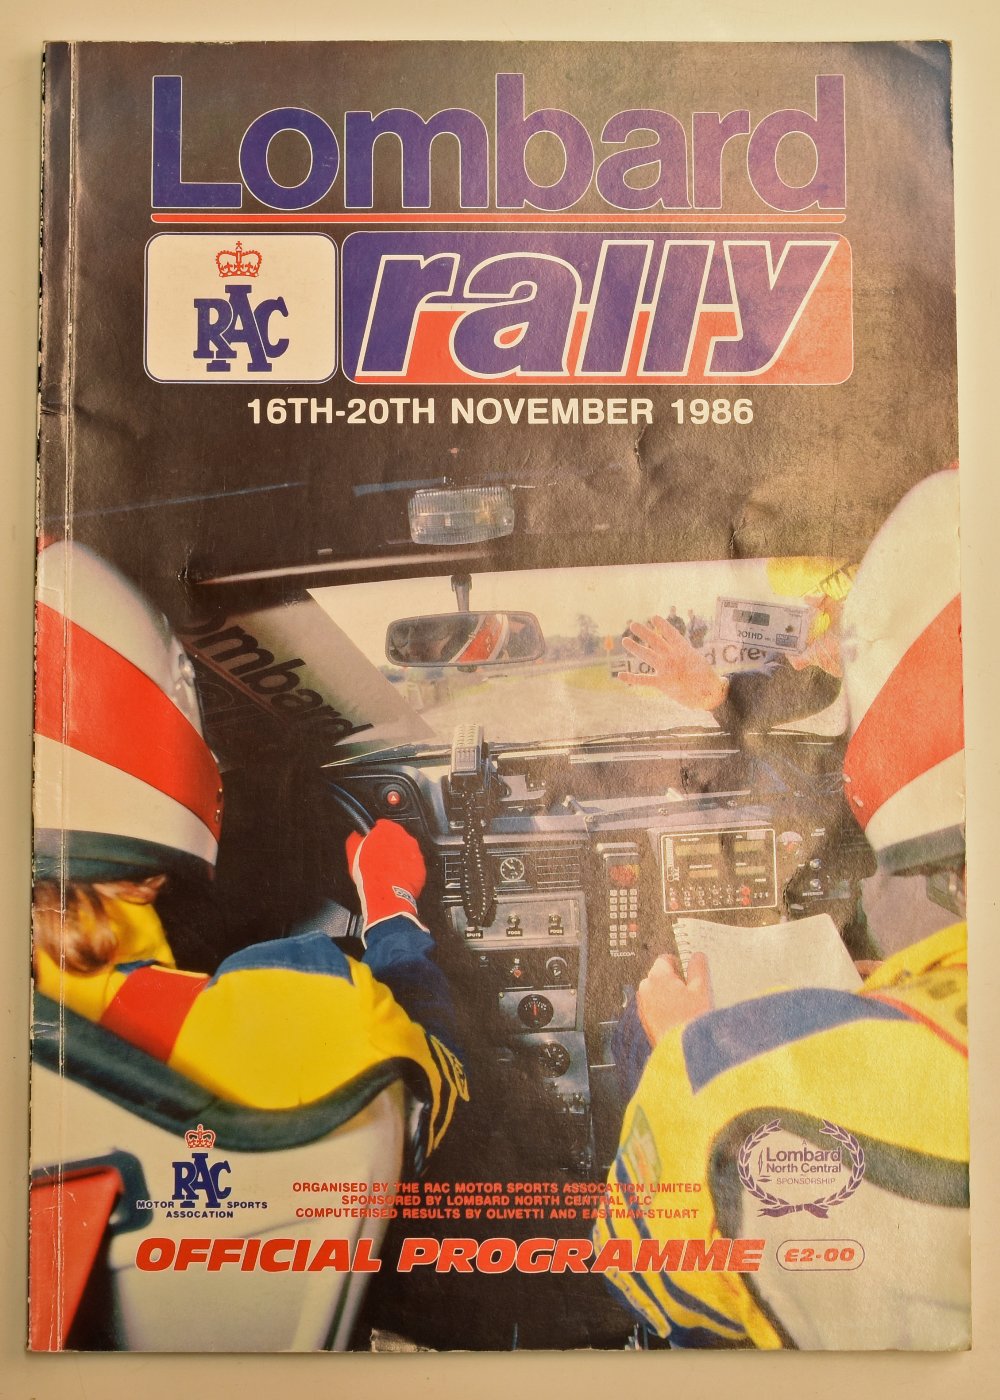 1986 Lombard RAC Rally Programme date 16-20th November appears in good condition overall